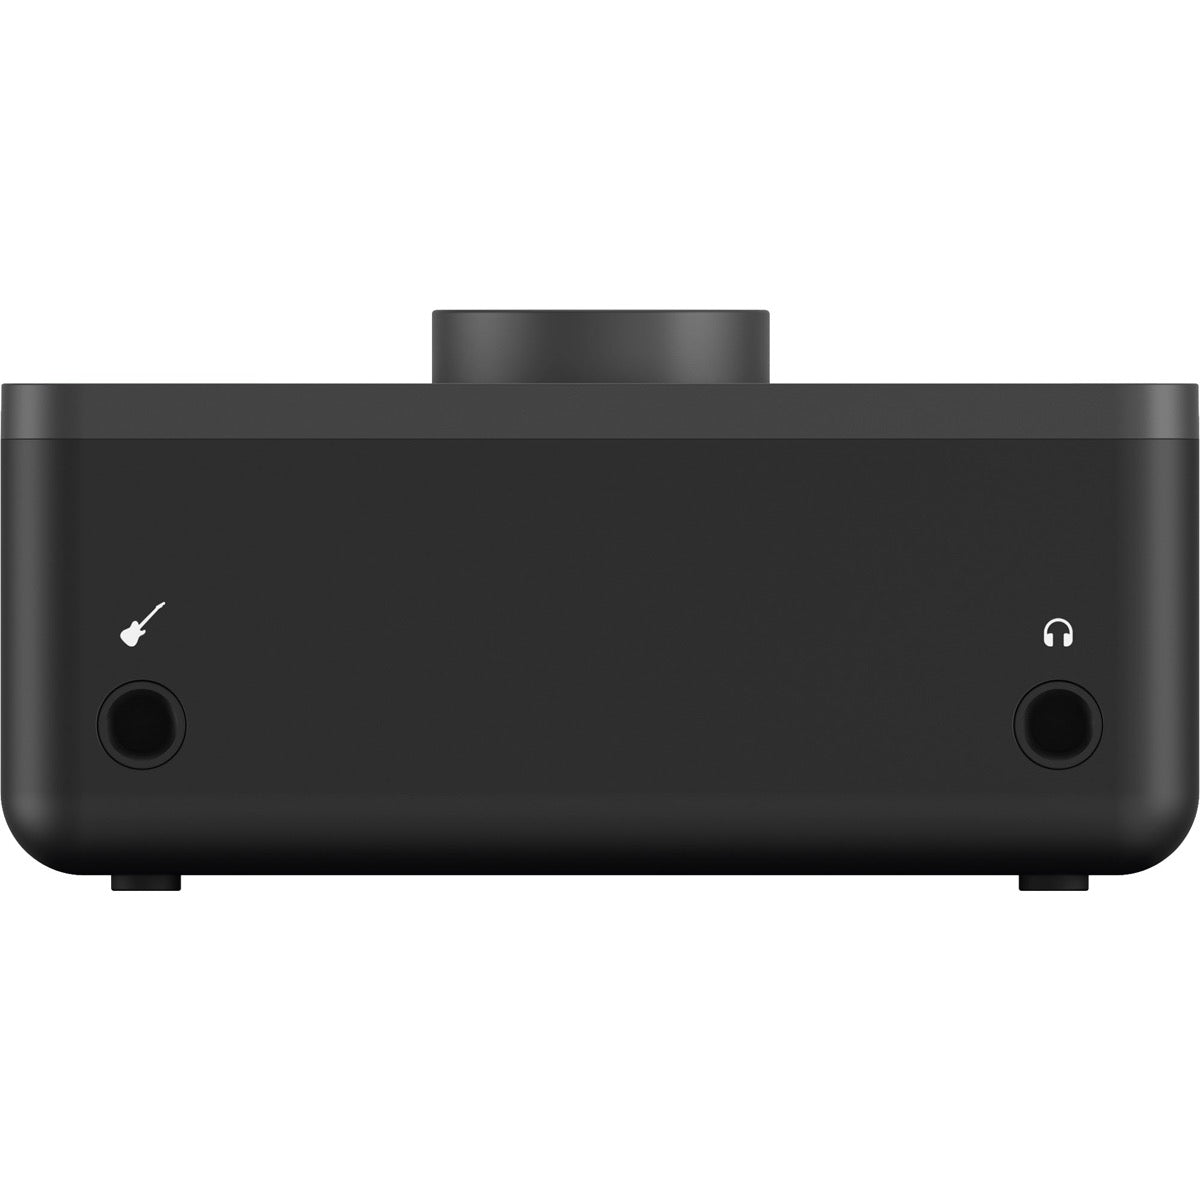 Audient Evo 4 2in/2out USB-C Audio Interface View 3